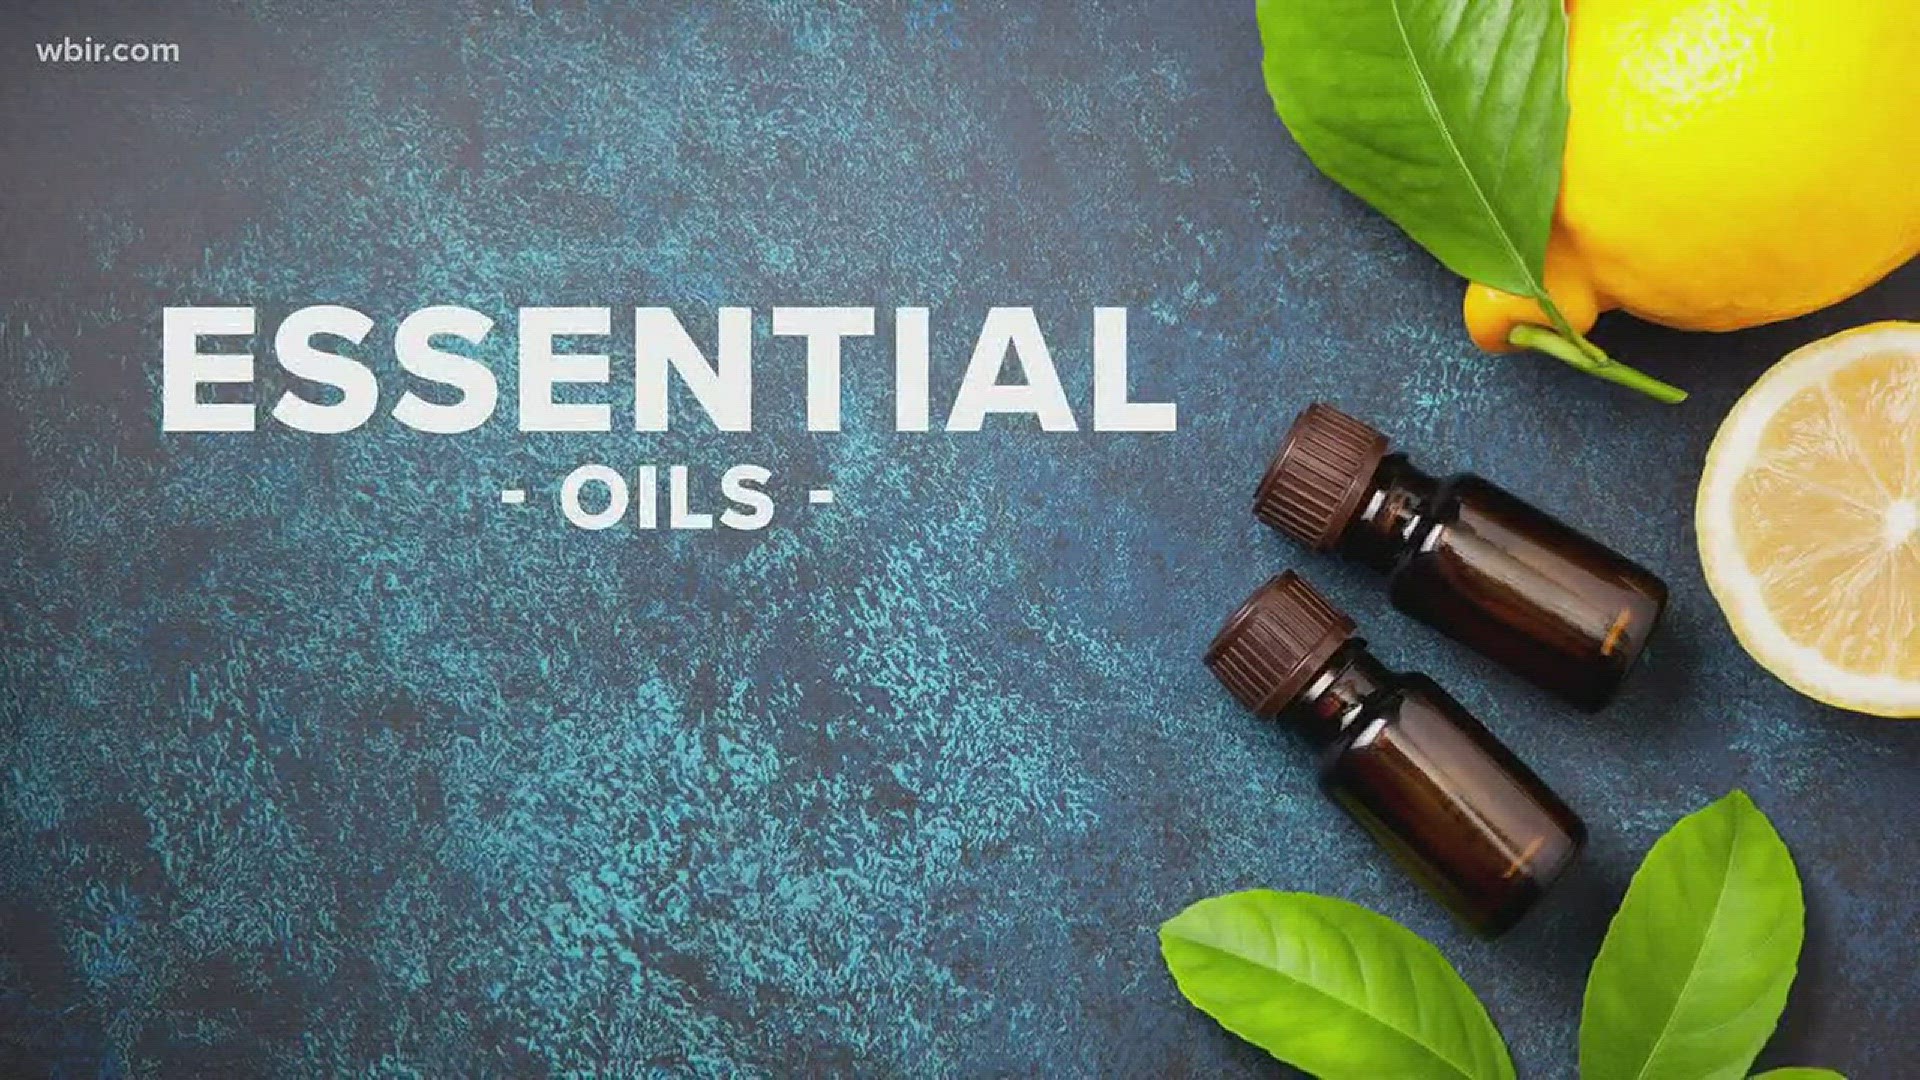 Dr. Bell from UT Medical Center's Integrative Health Center talks about essential oils